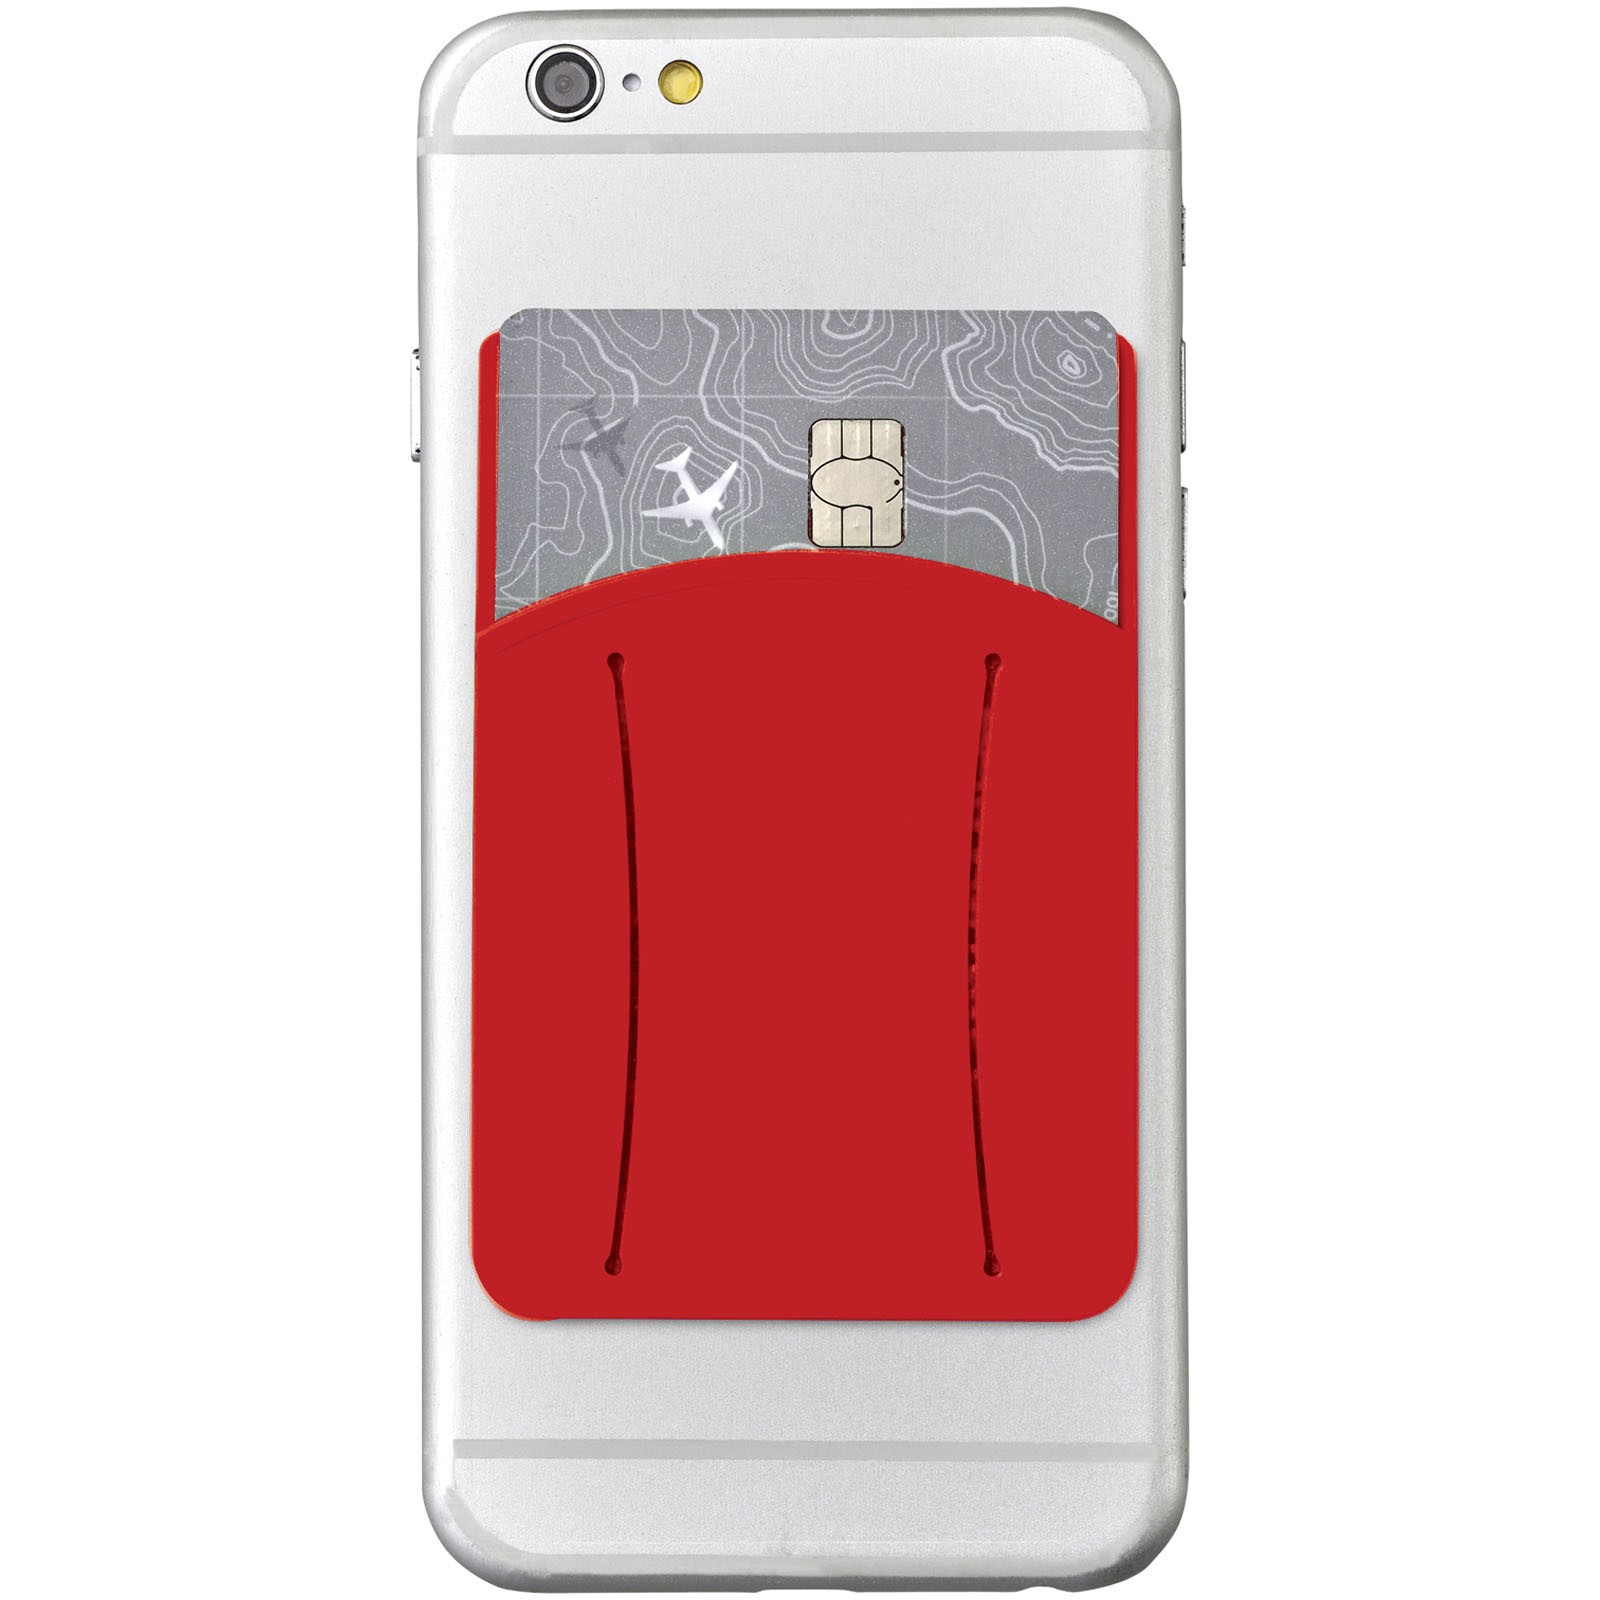 Storee silicone smartphone wallet with finger slot - Red